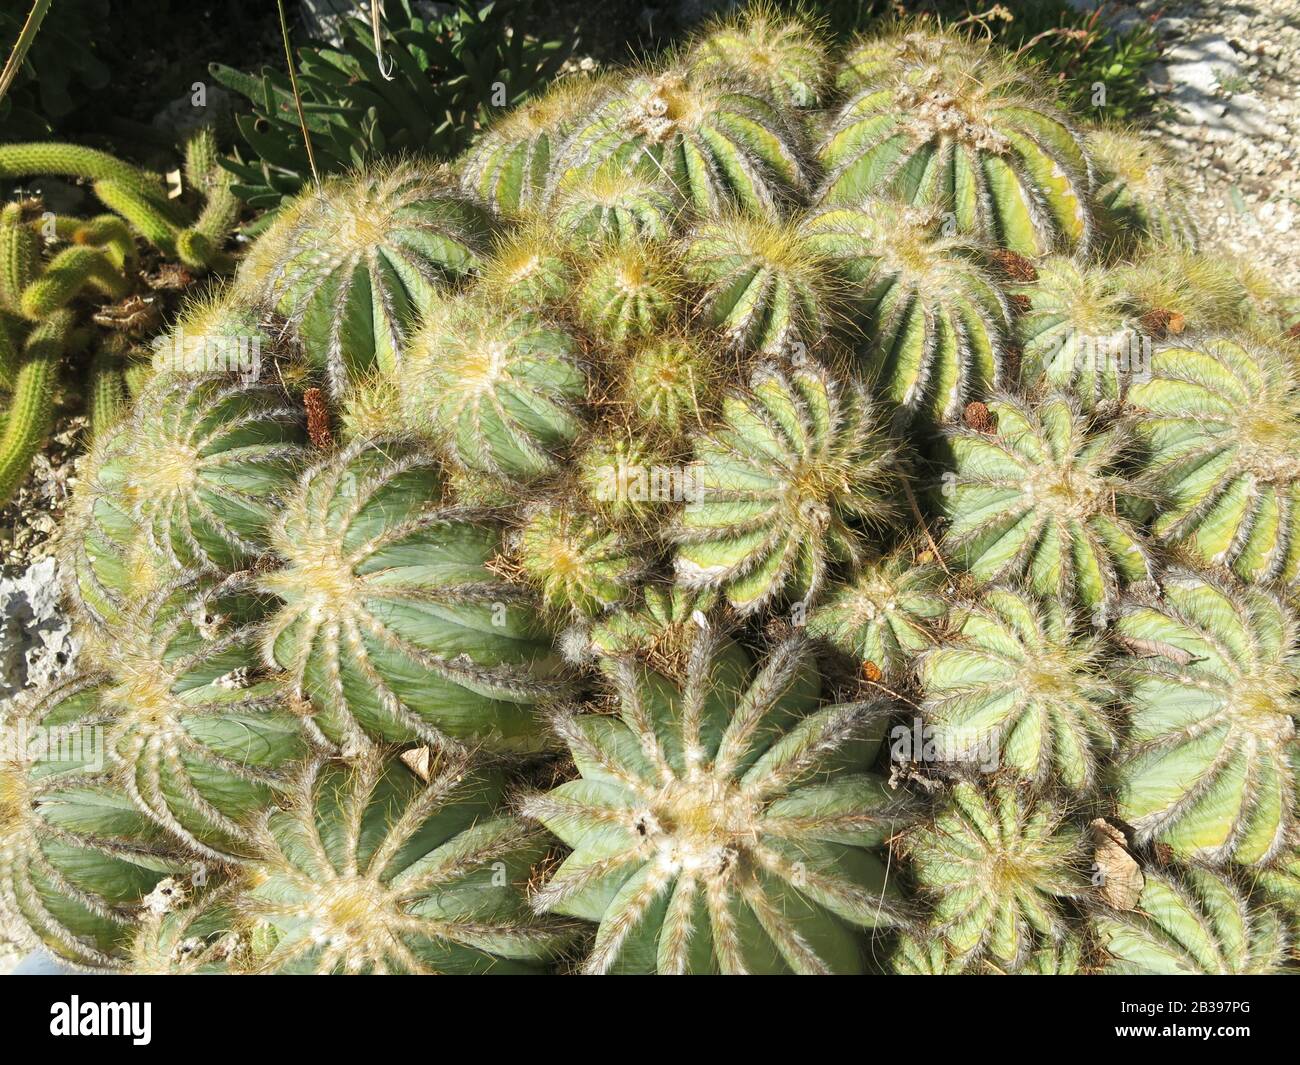 Close-up of the spiky, woolly cactus Eriocephala Magnifica, a native plant in the cactaceae family from South America. Stock Photo